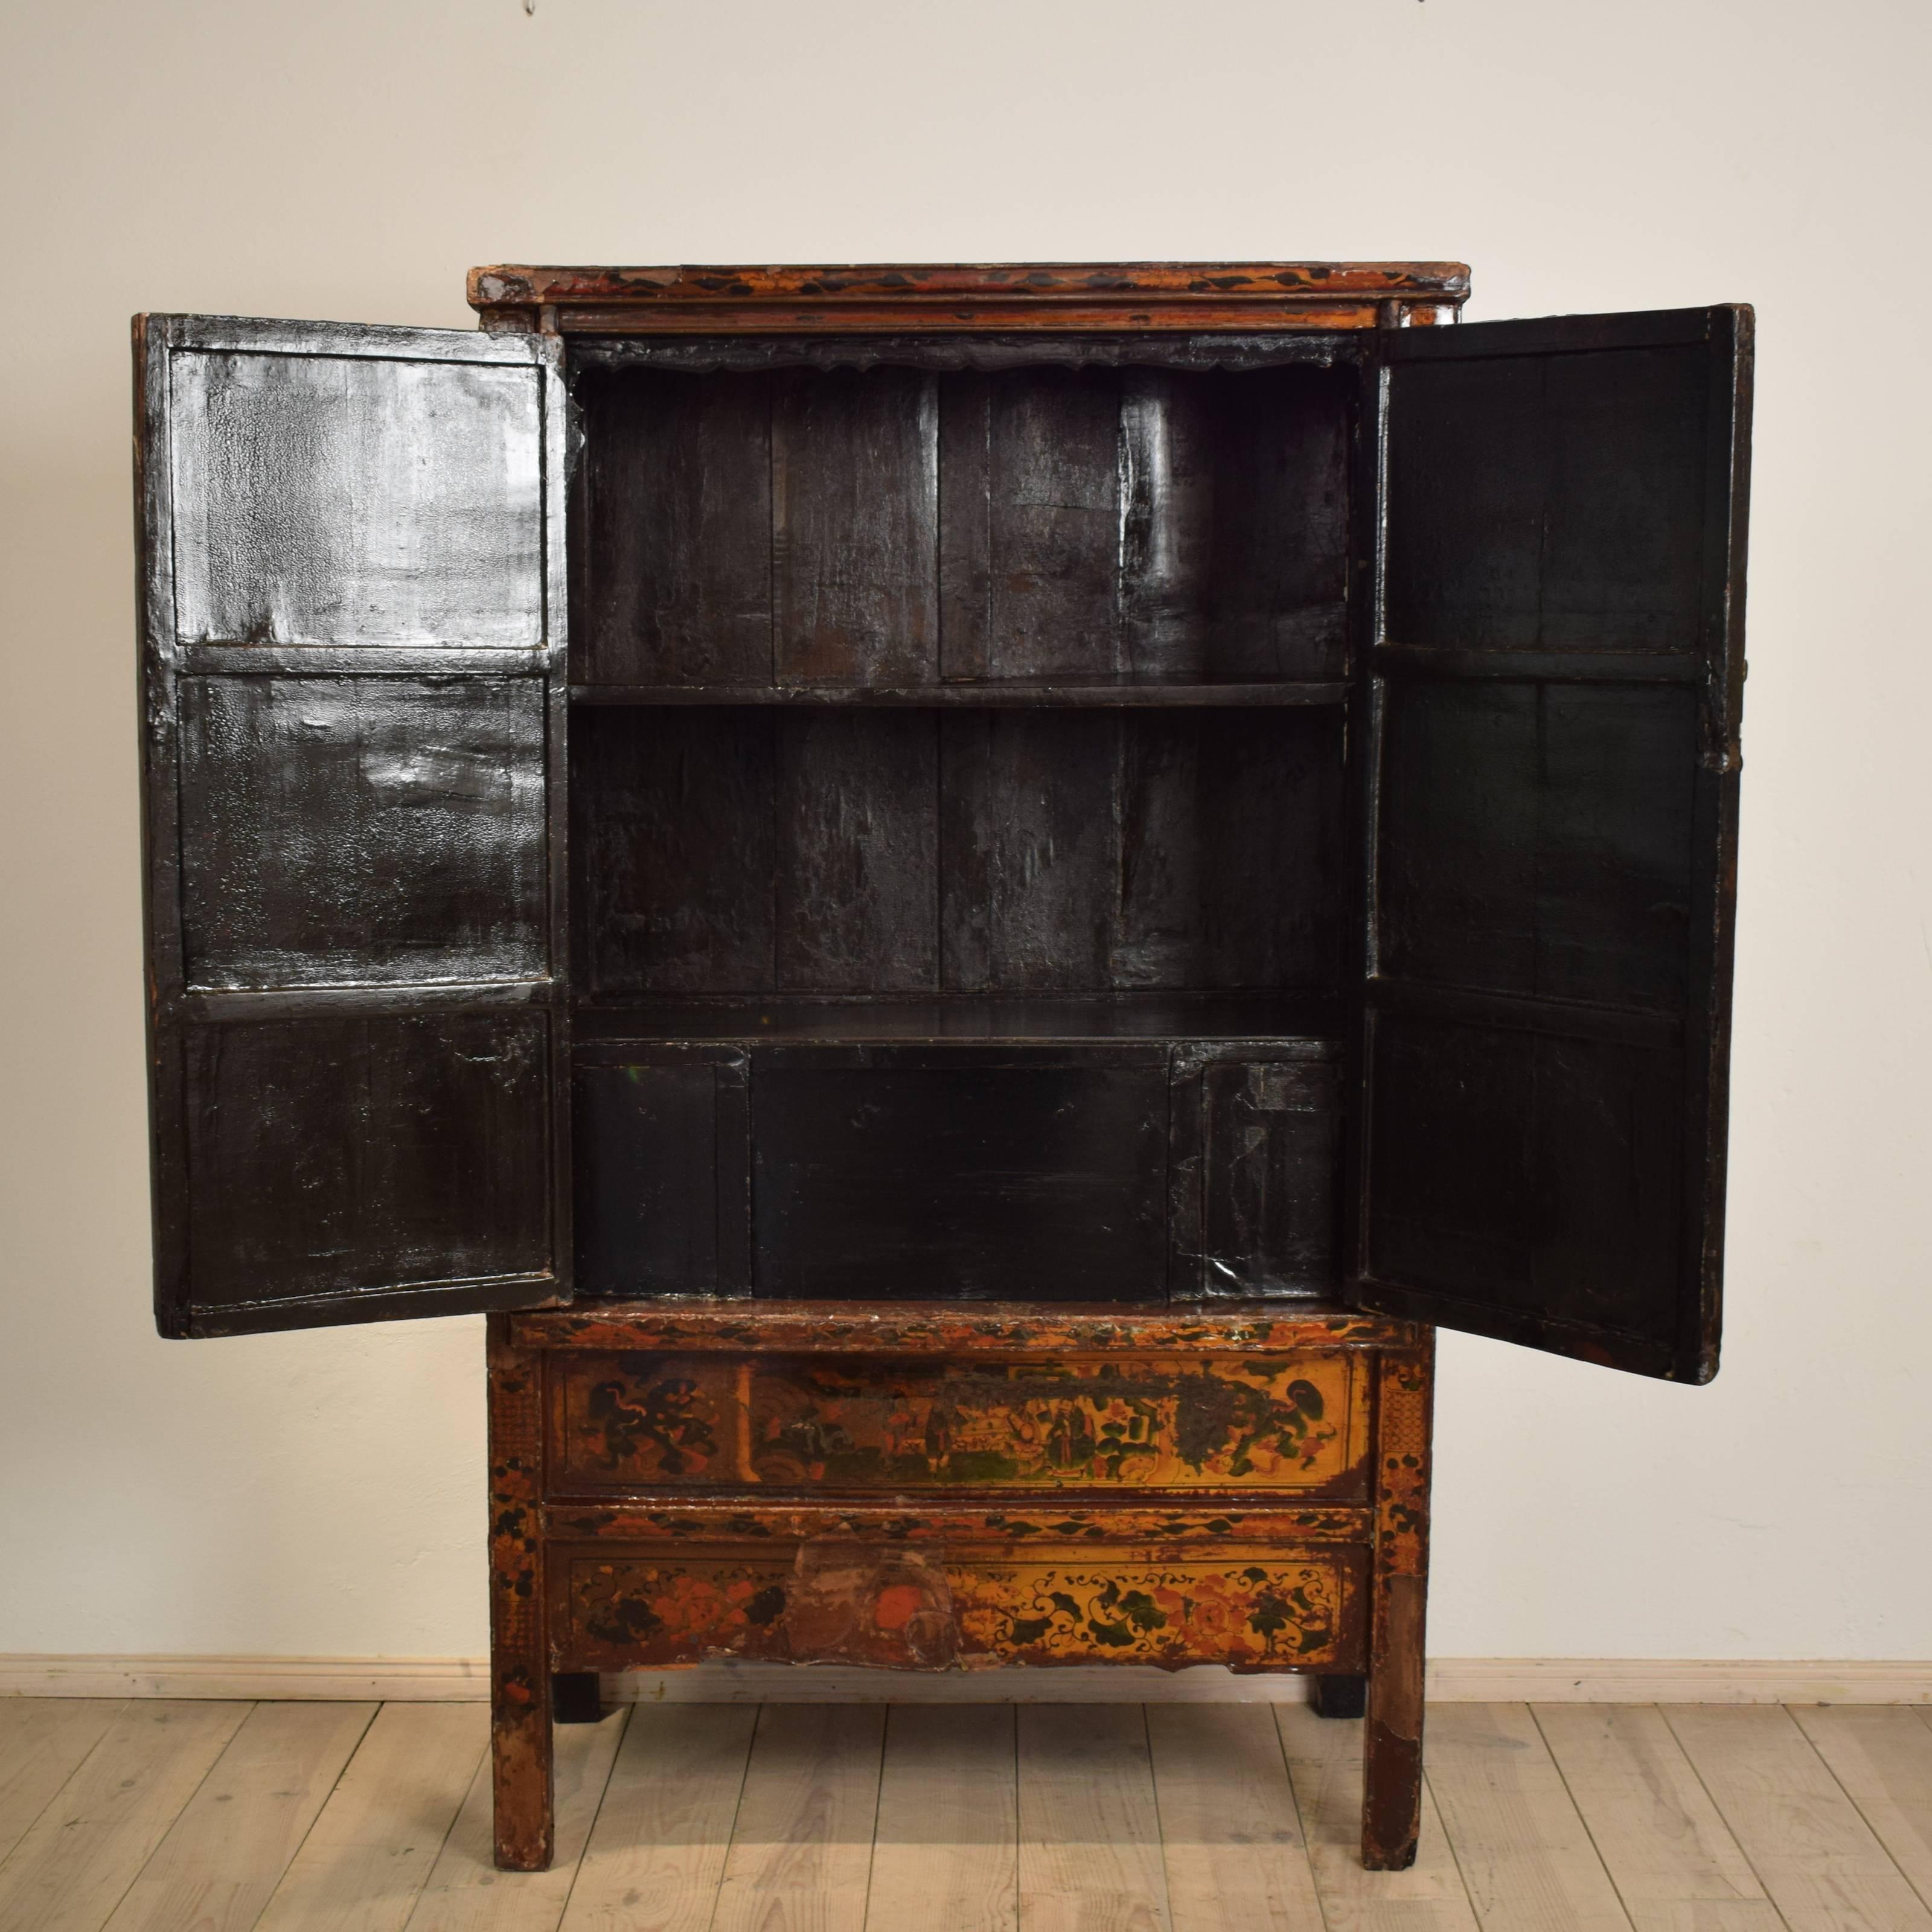 This 1890s Chinese cabinet is made of wood with polychrome designs and a lacquered finish. The front of the cabinets shows a Chinese family tree. The sides are in black lacquer. and decorative brass hardware. The interior is painted black with a